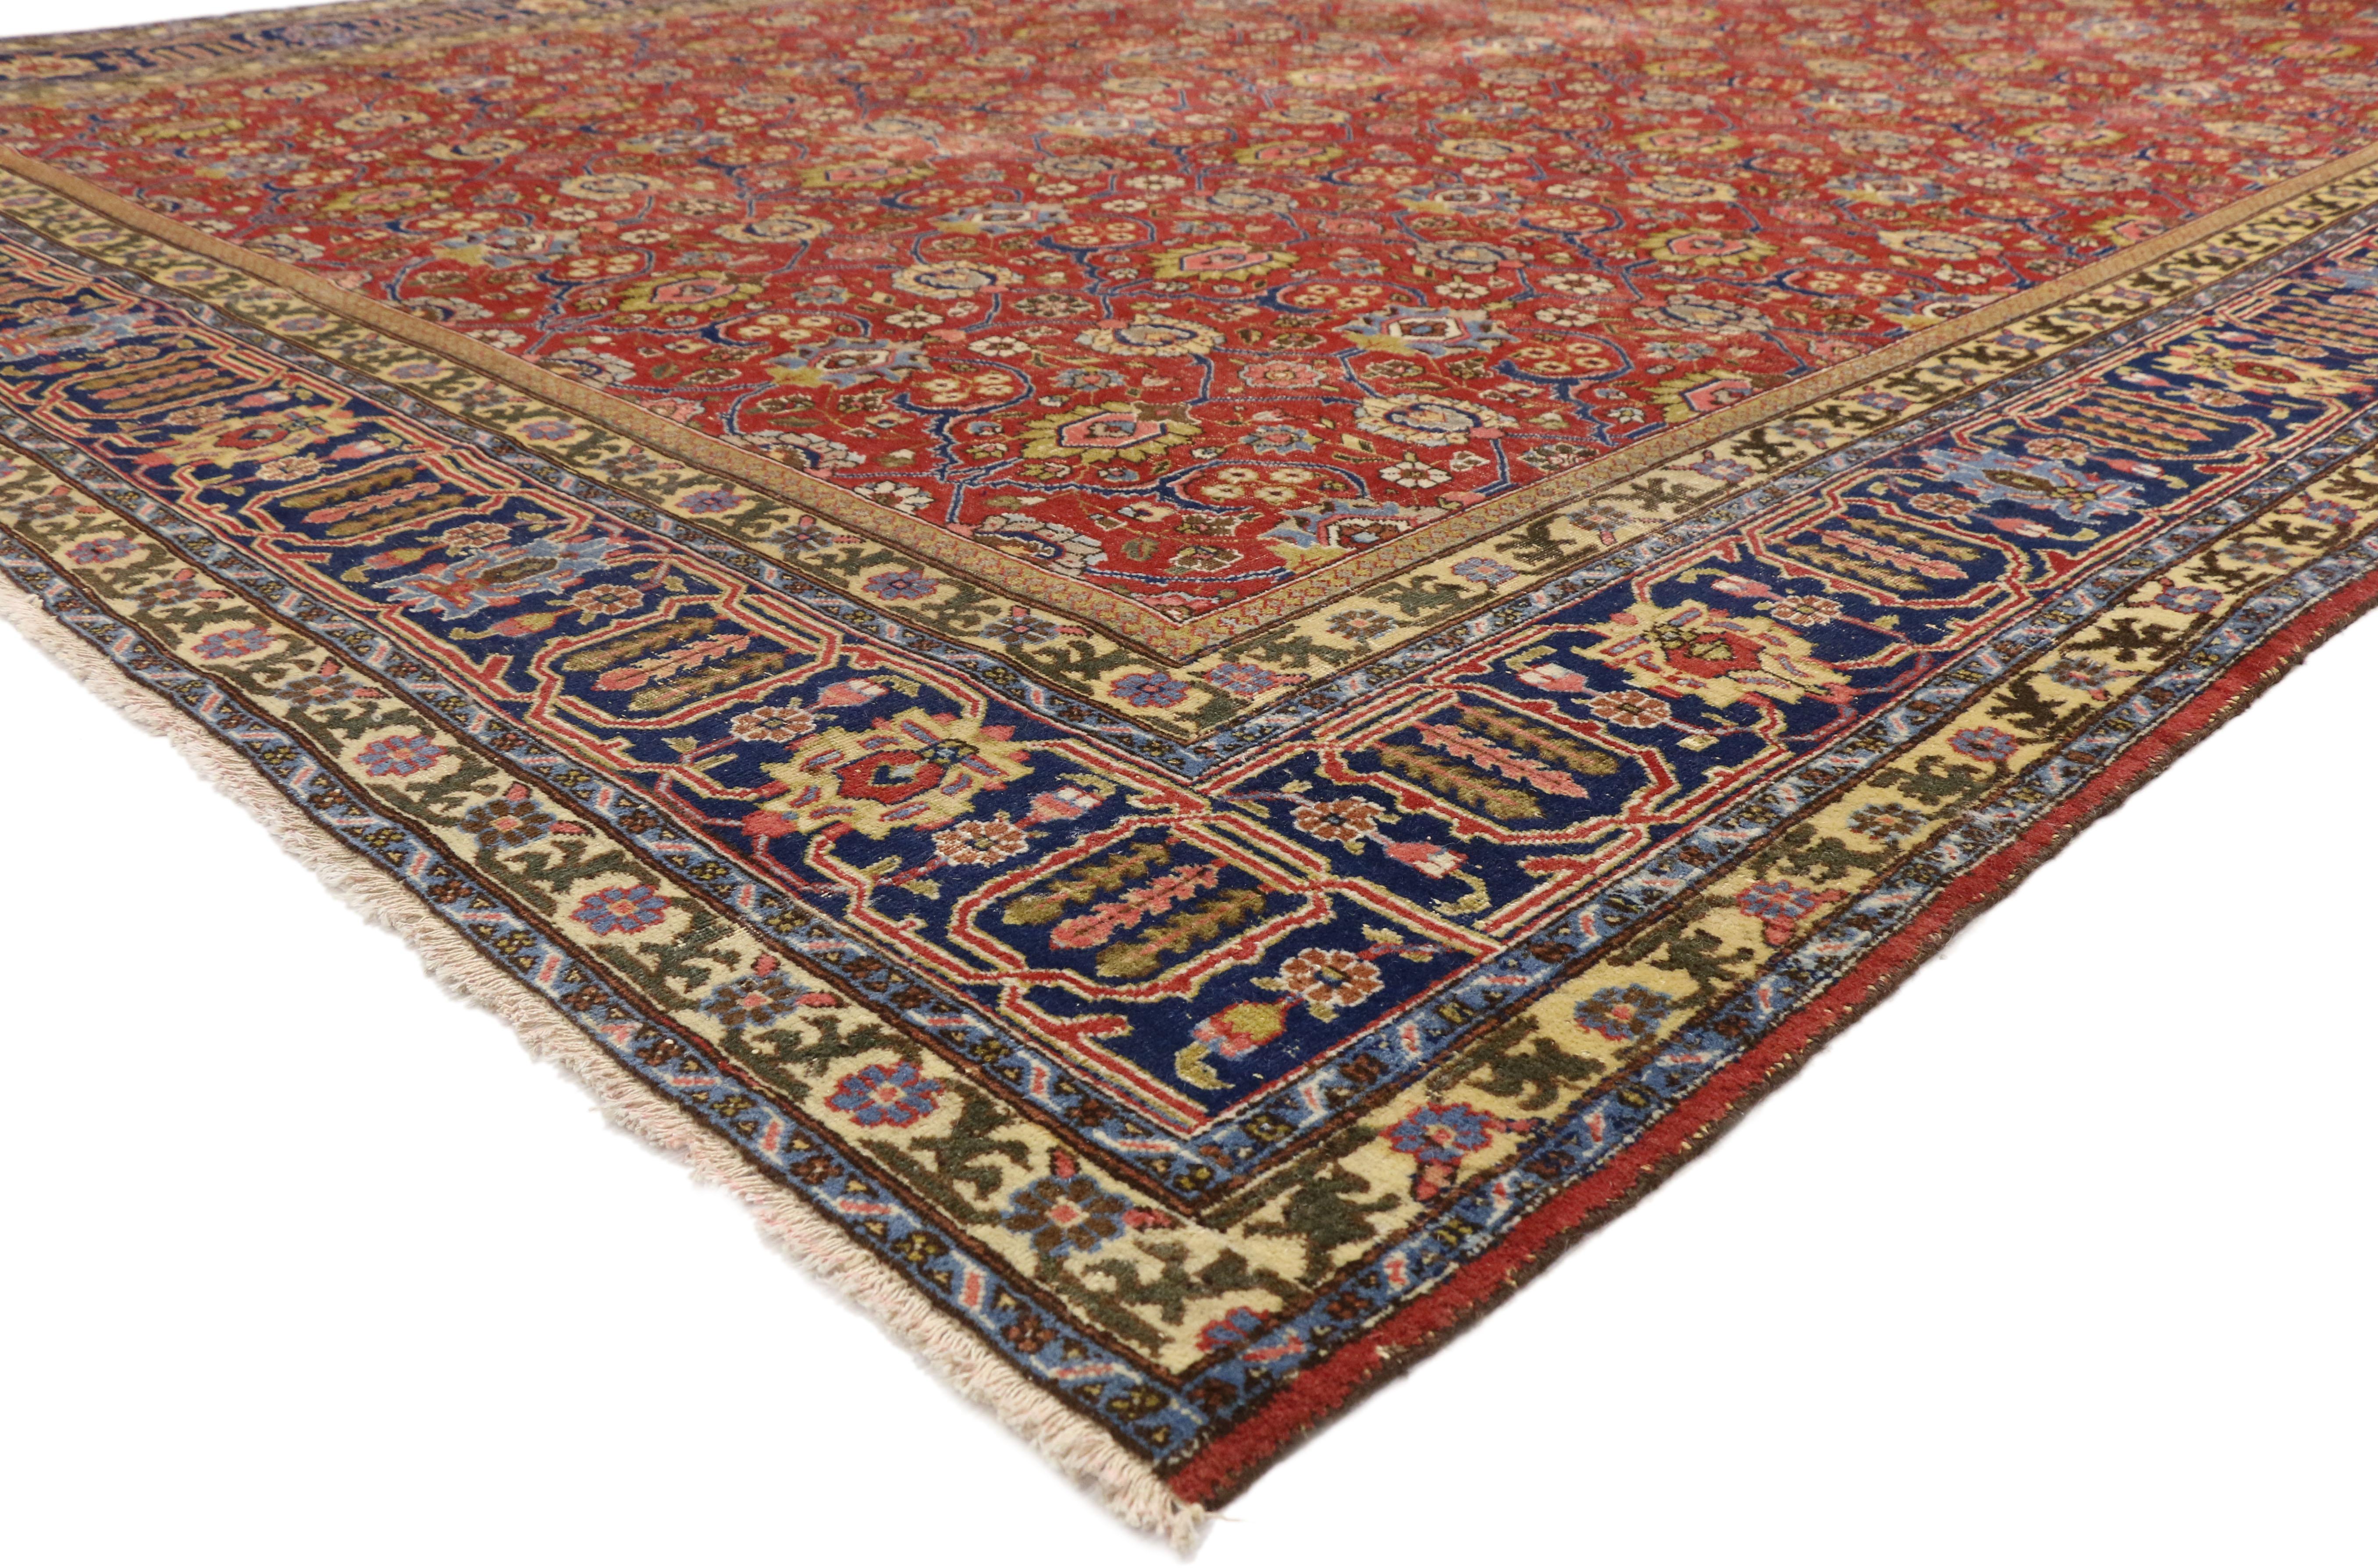 77216, Distressed Vintage Persian Tabriz Area Rug with Relaxed Federal Style. Regal hues, intricate details, and all-over symmetry create a neoclassical style in this hand knotted wool distressed vintage Persian Tabriz rug. Authentic, uneven wear